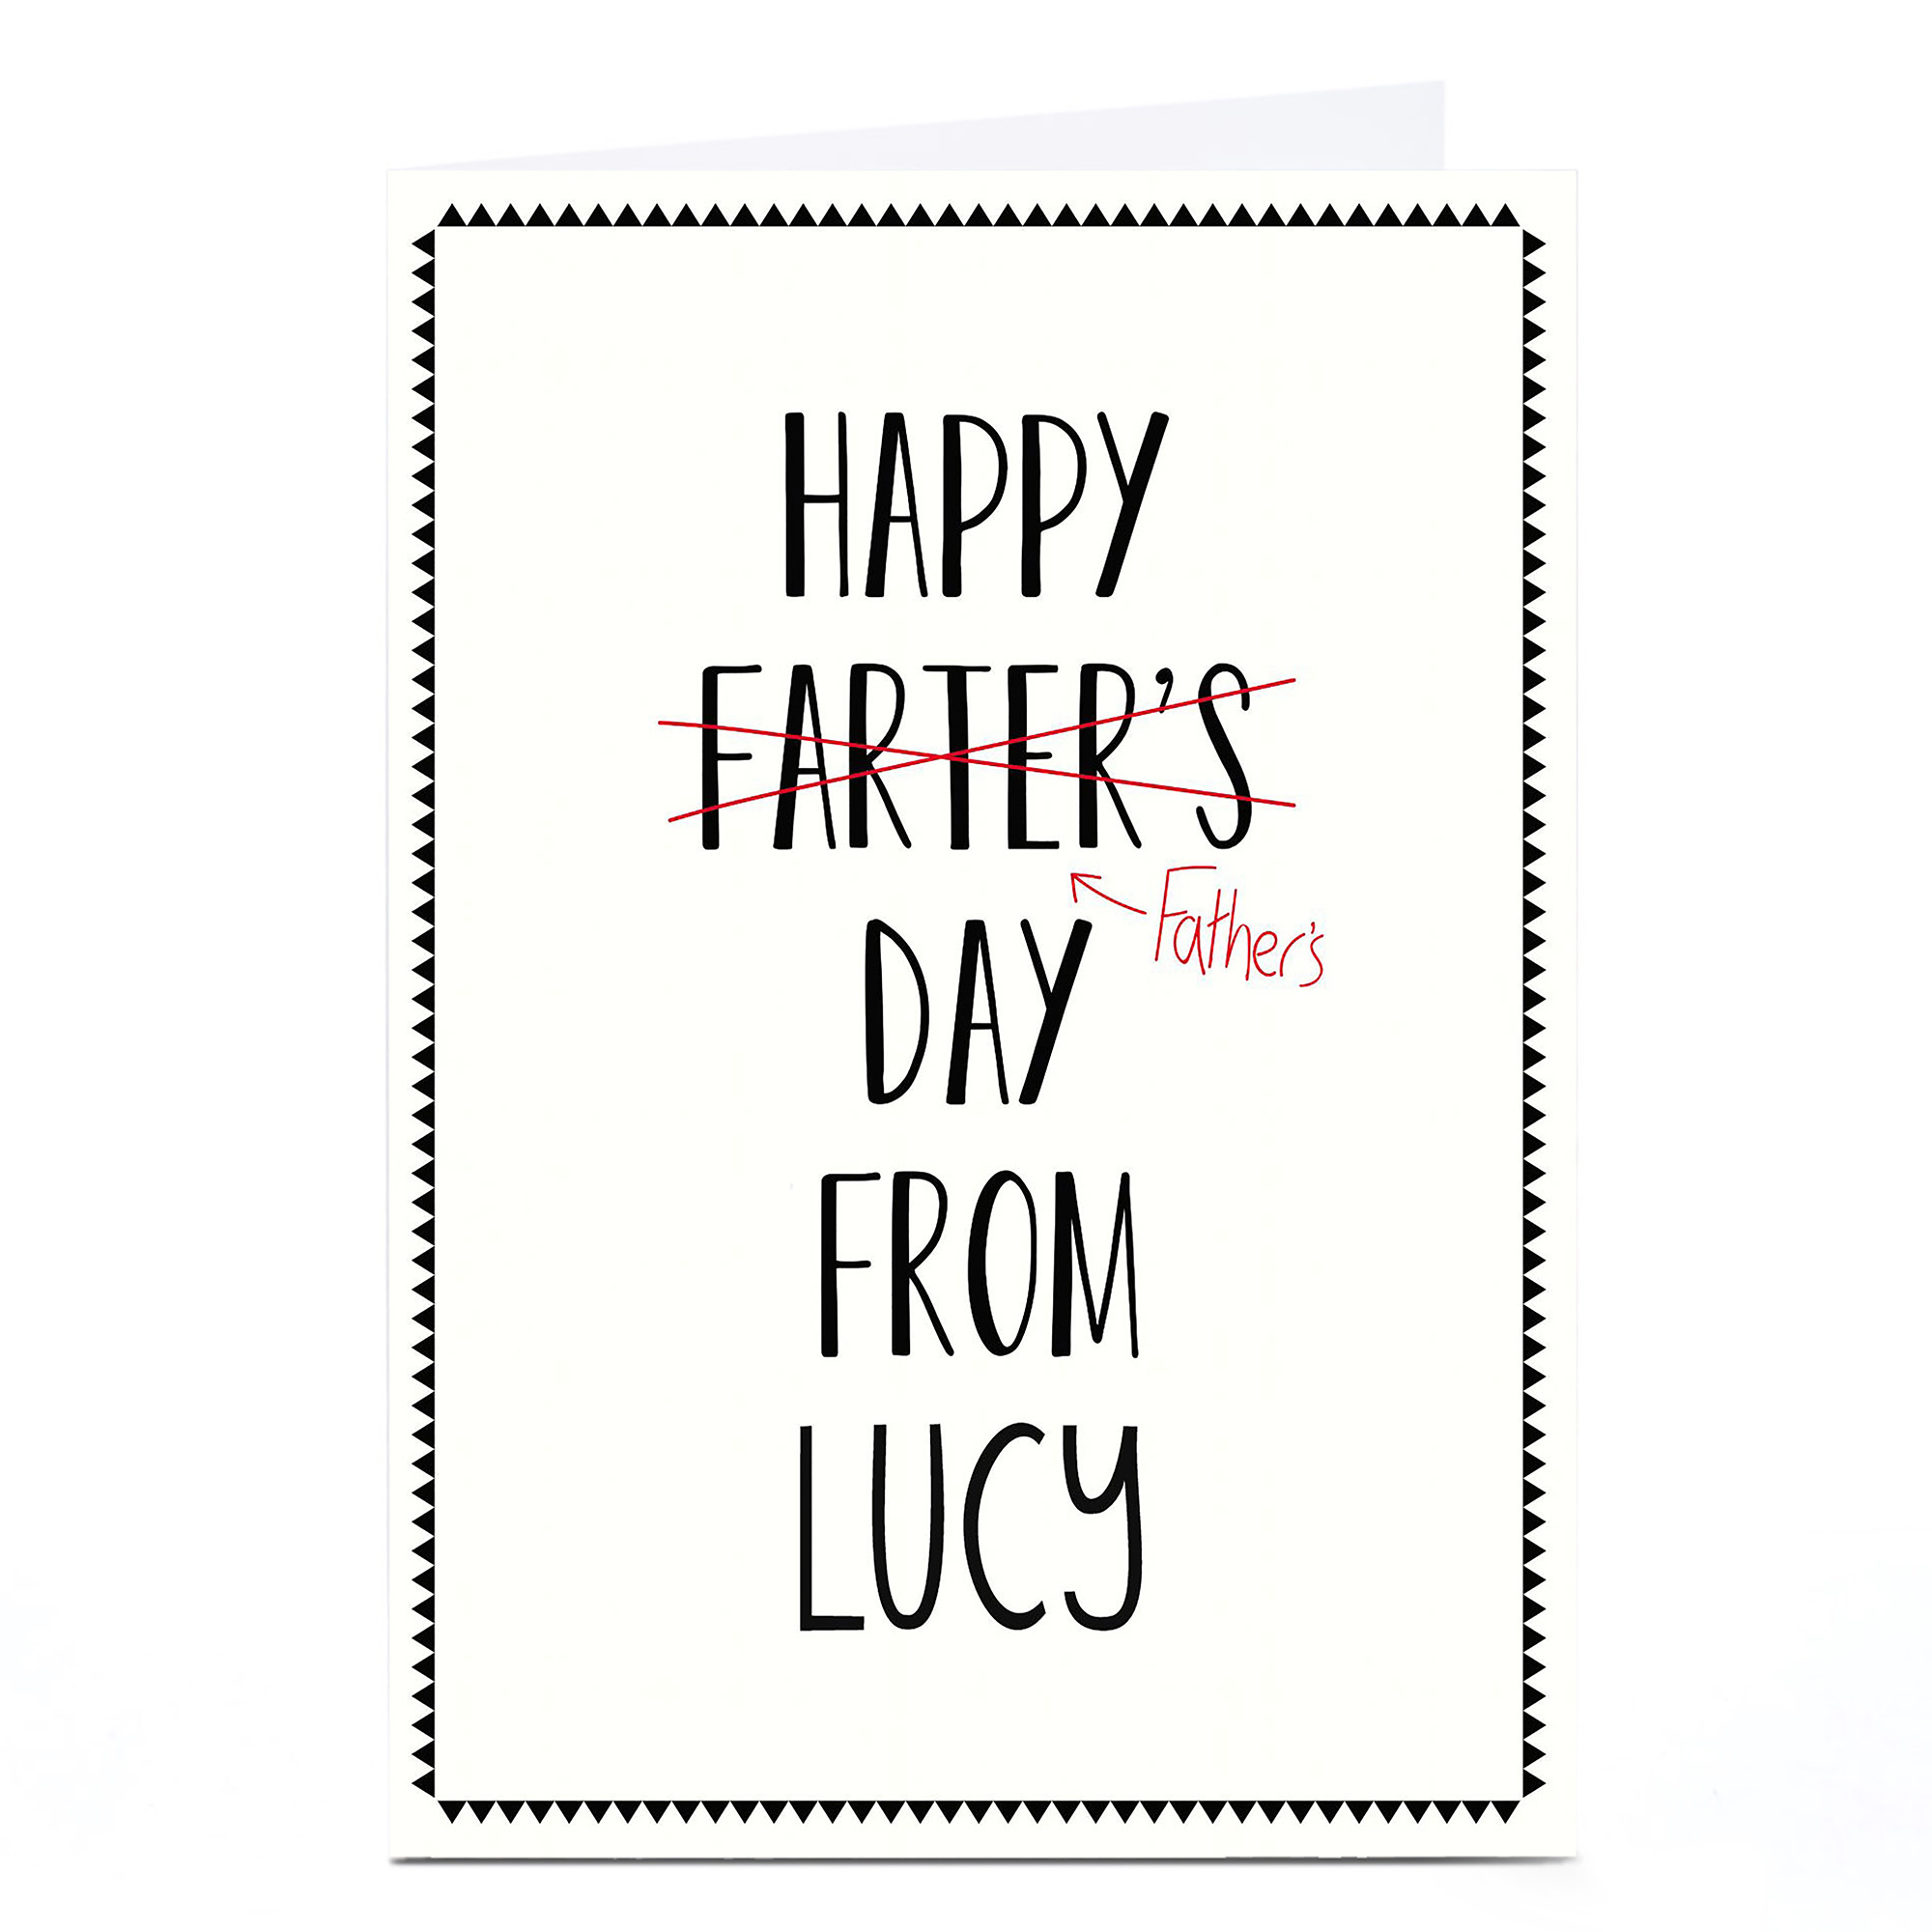 Personalised Father's Day Card - Farter's Day